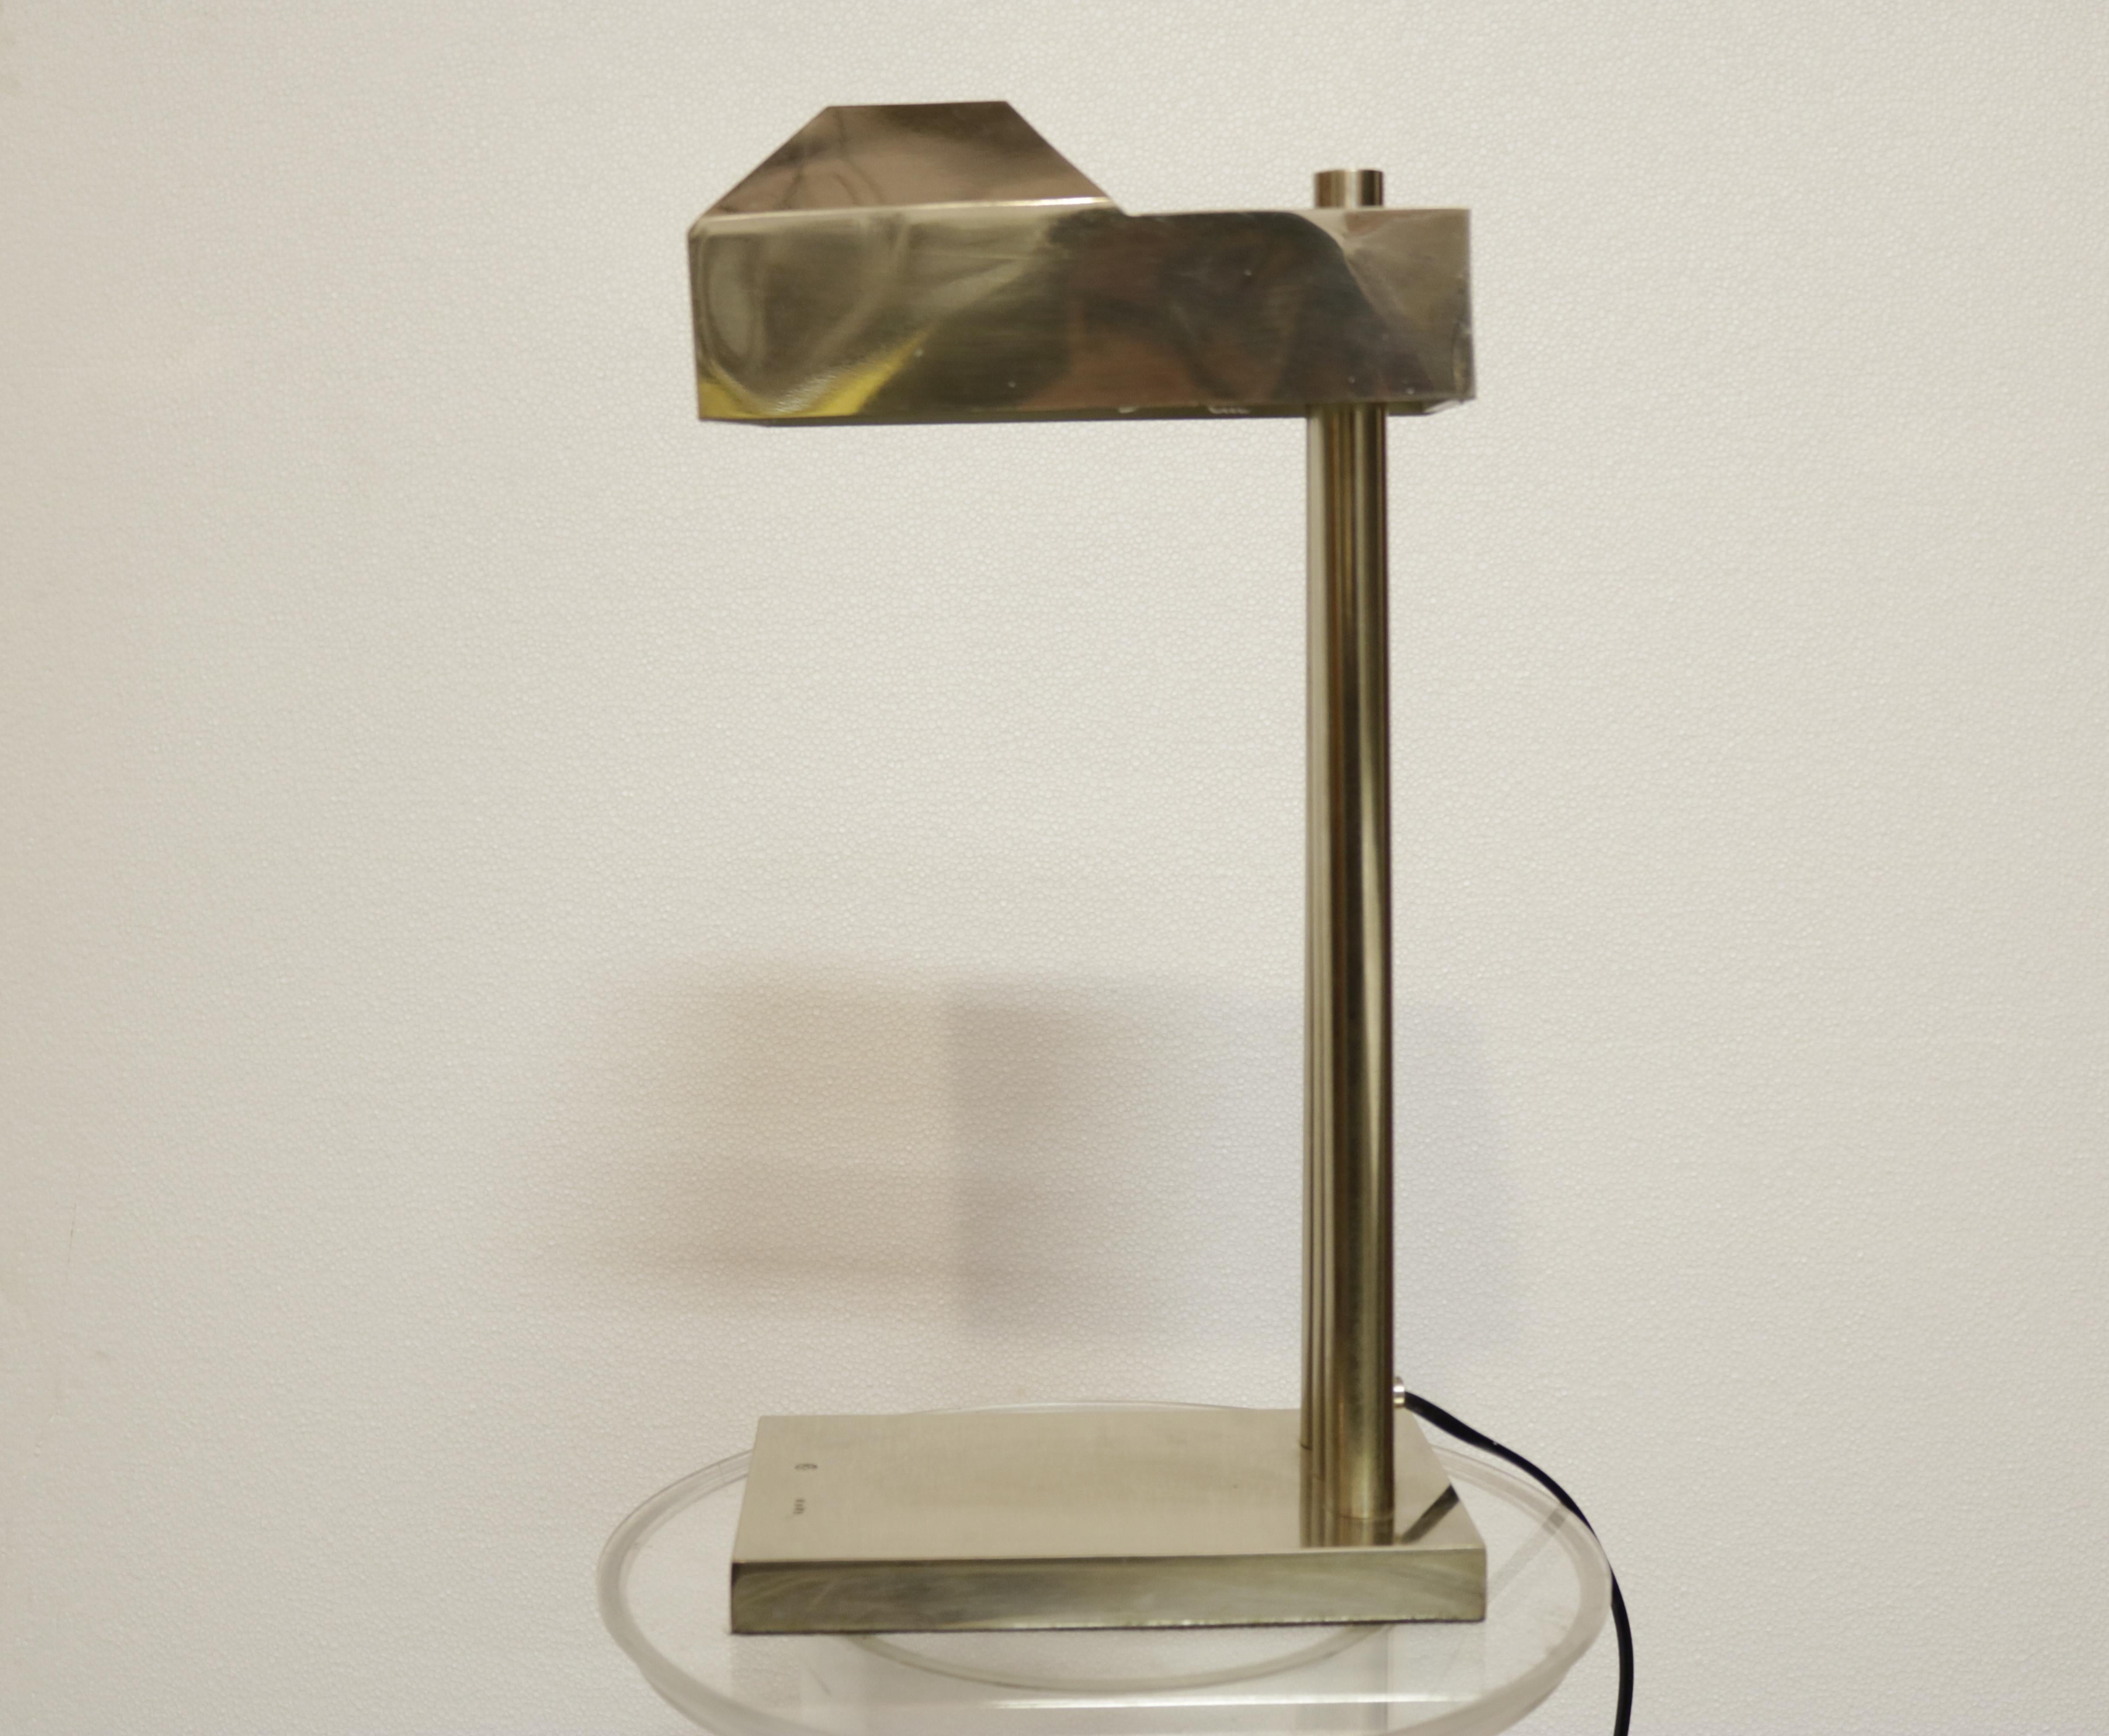 A rectangular table lamp by Marcel Breuer.
They are the first edition of Marcel Breuer lamps. They are stamped with numbers only, contrary to the ones marked 